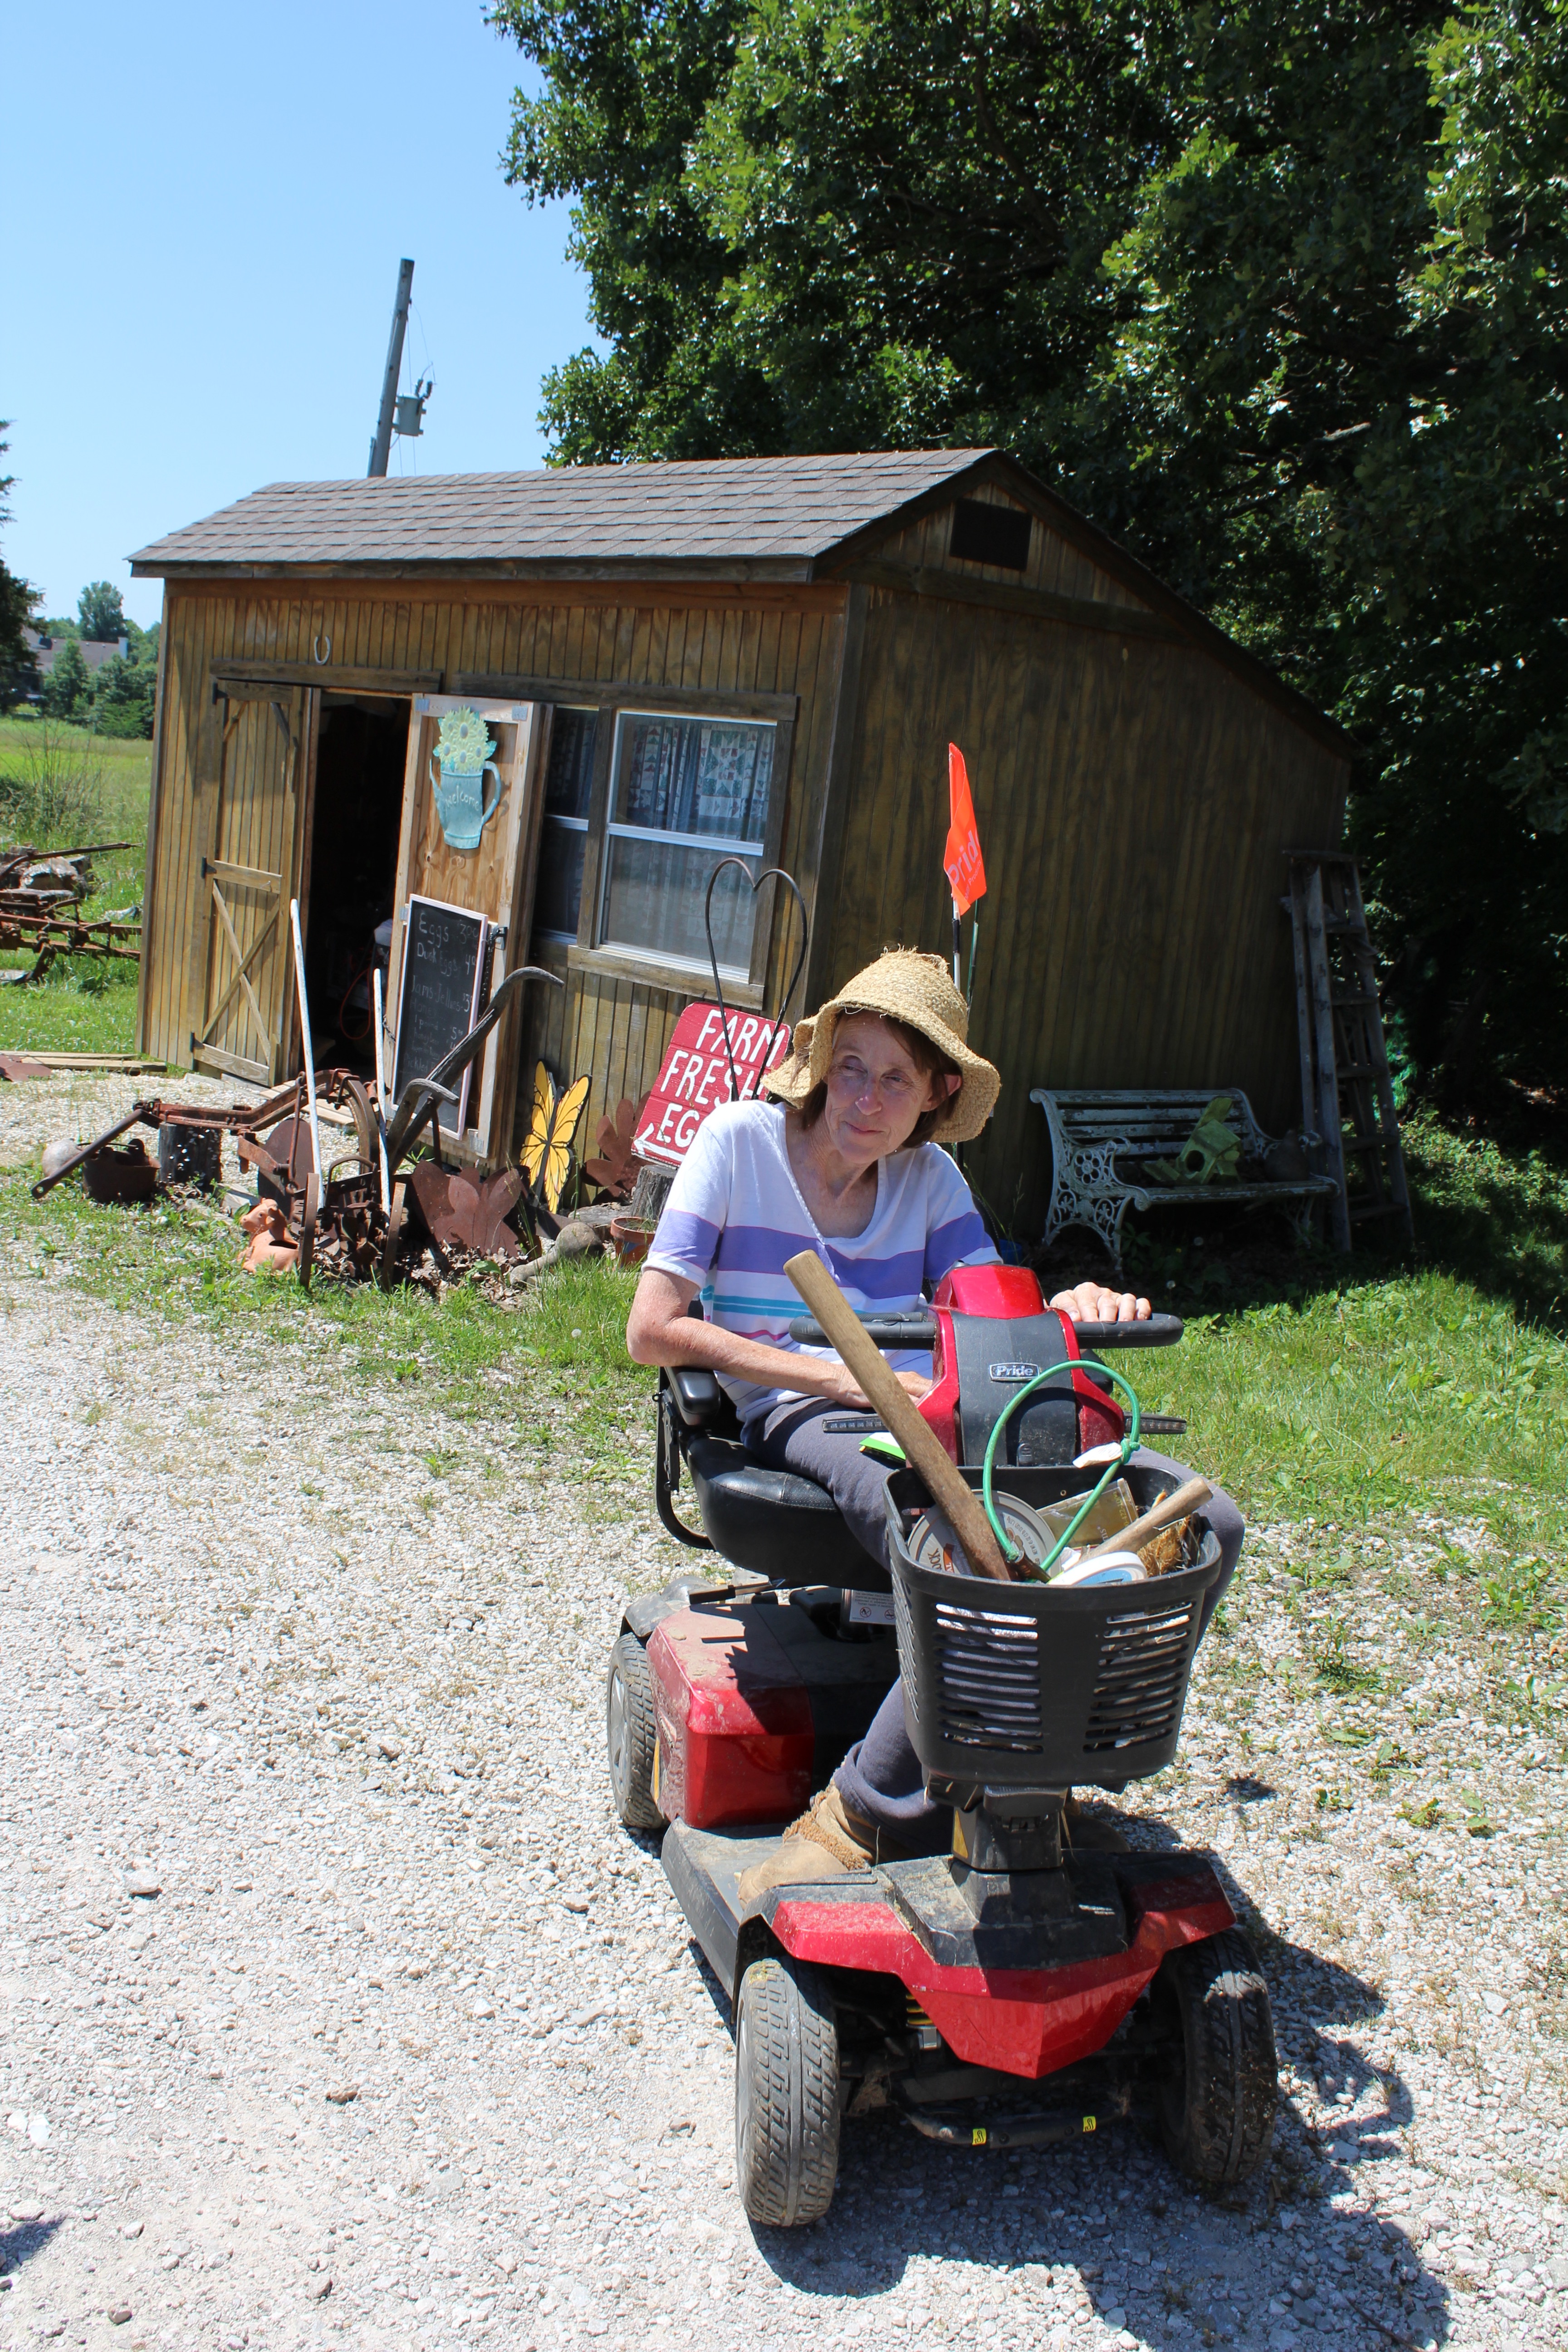 A small garden shed holds produce, eggs and jellies sought after by suburban St. Louis residents. Kim DaWaulter likes to share stories of where food comes from to visitors to her farm.